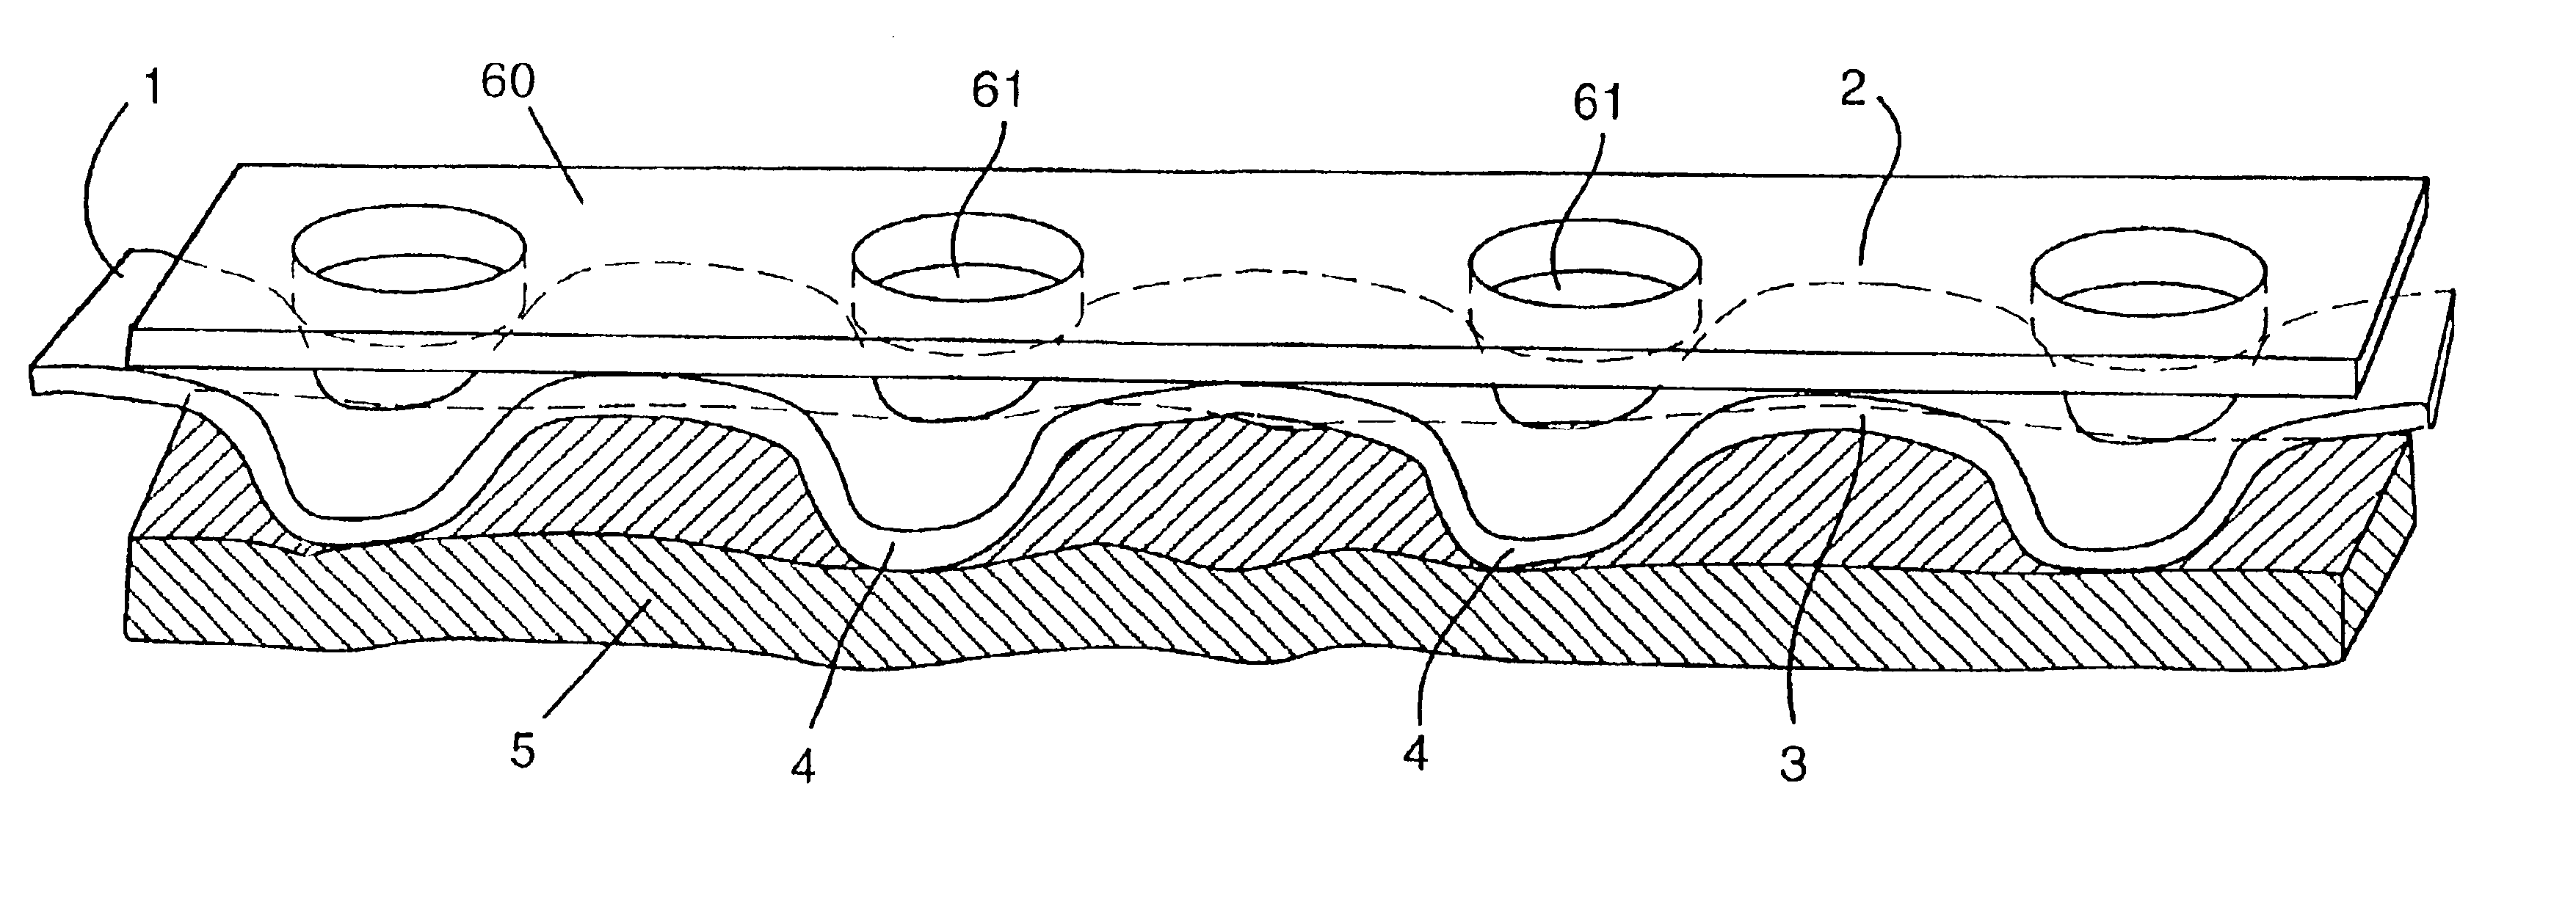 Dual-zoned absorbent webs